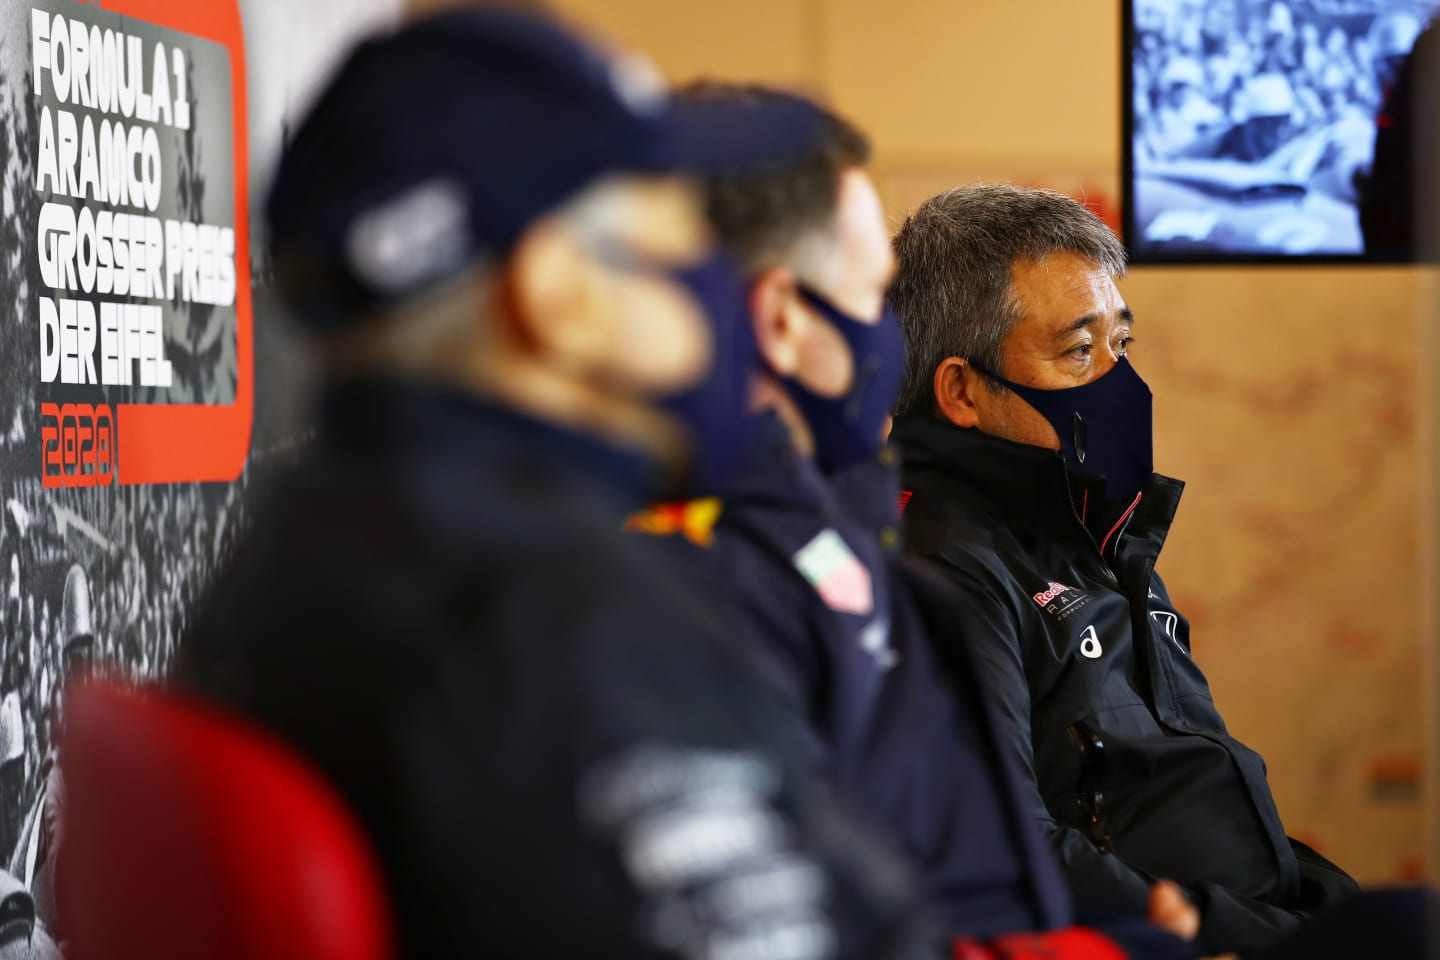 NUERBURG, GERMANY - OCTOBER 09: Masashi Yamamoto of Honda talks in the Team Principals Press Conference during practice ahead of the F1 Eifel Grand Prix at Nuerburgring on October 09, 2020 in Nuerburg, Germany. (Photo by Joe Portlock/Getty Images)